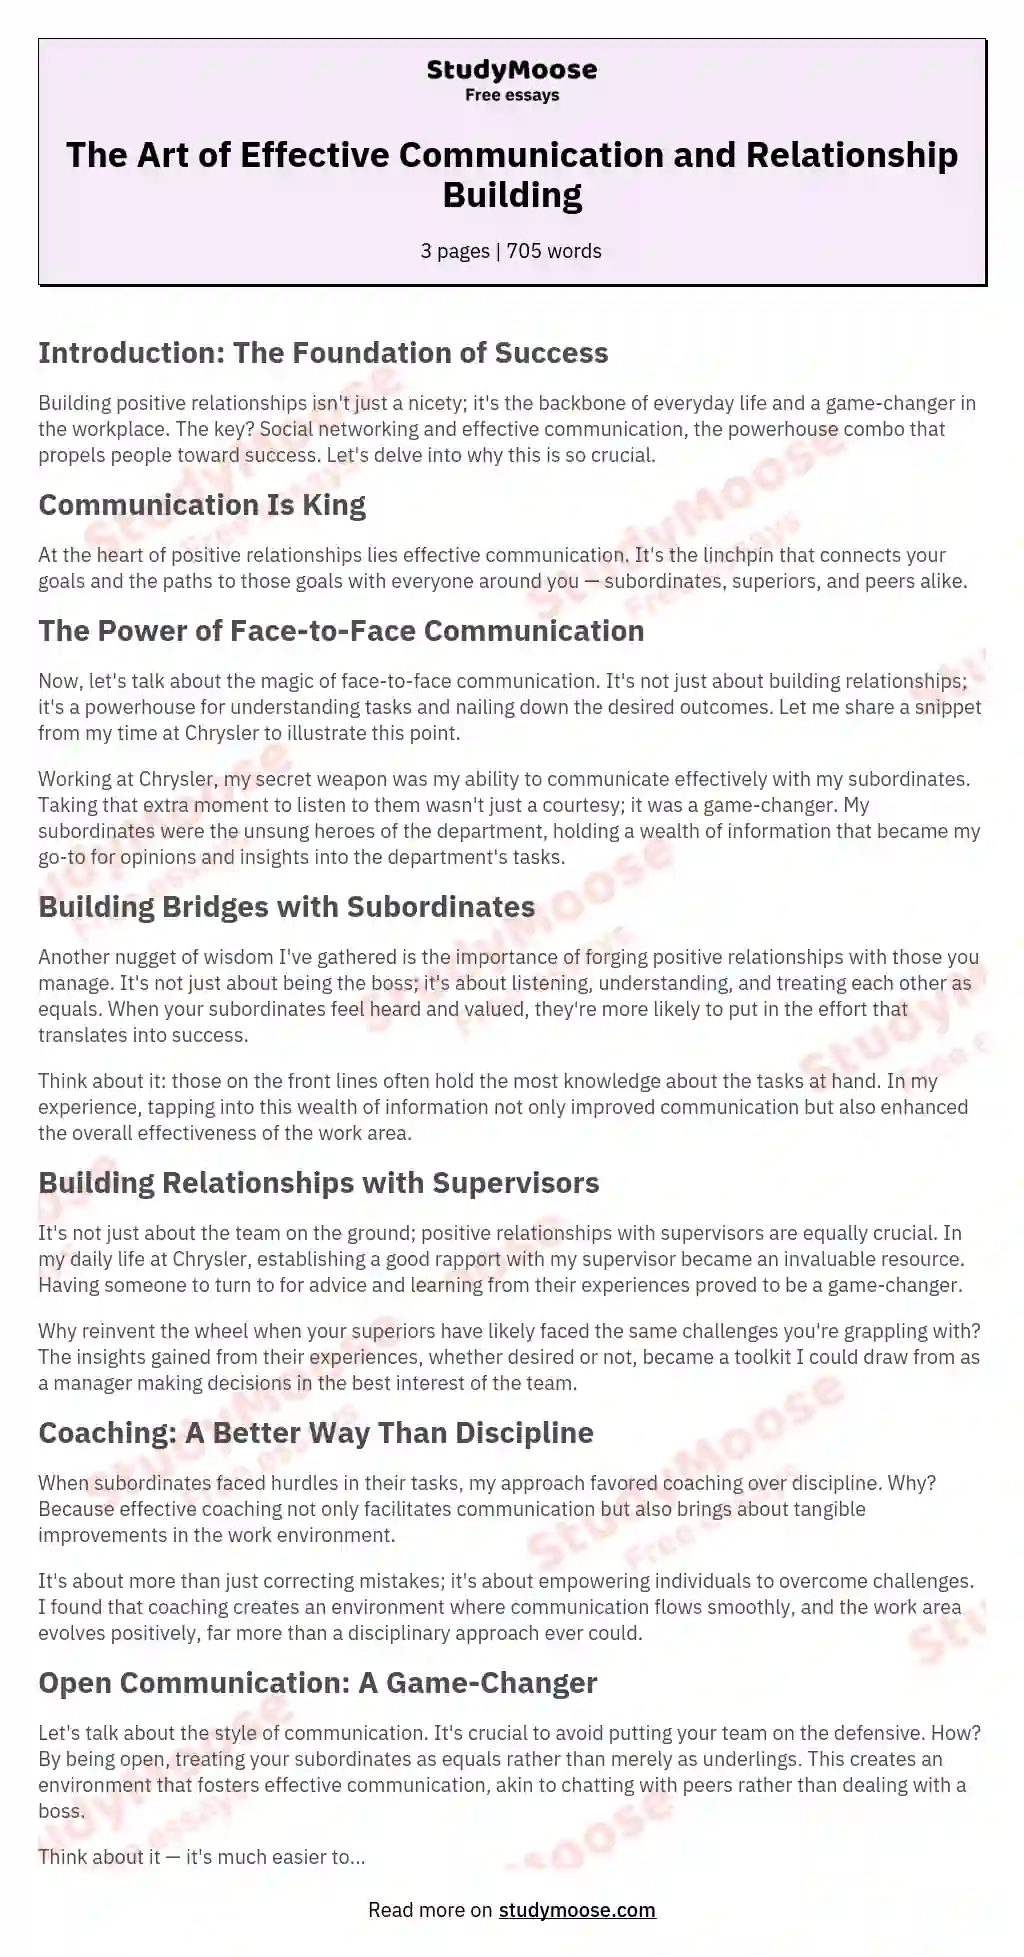 The Art of Effective Communication and Relationship Building essay